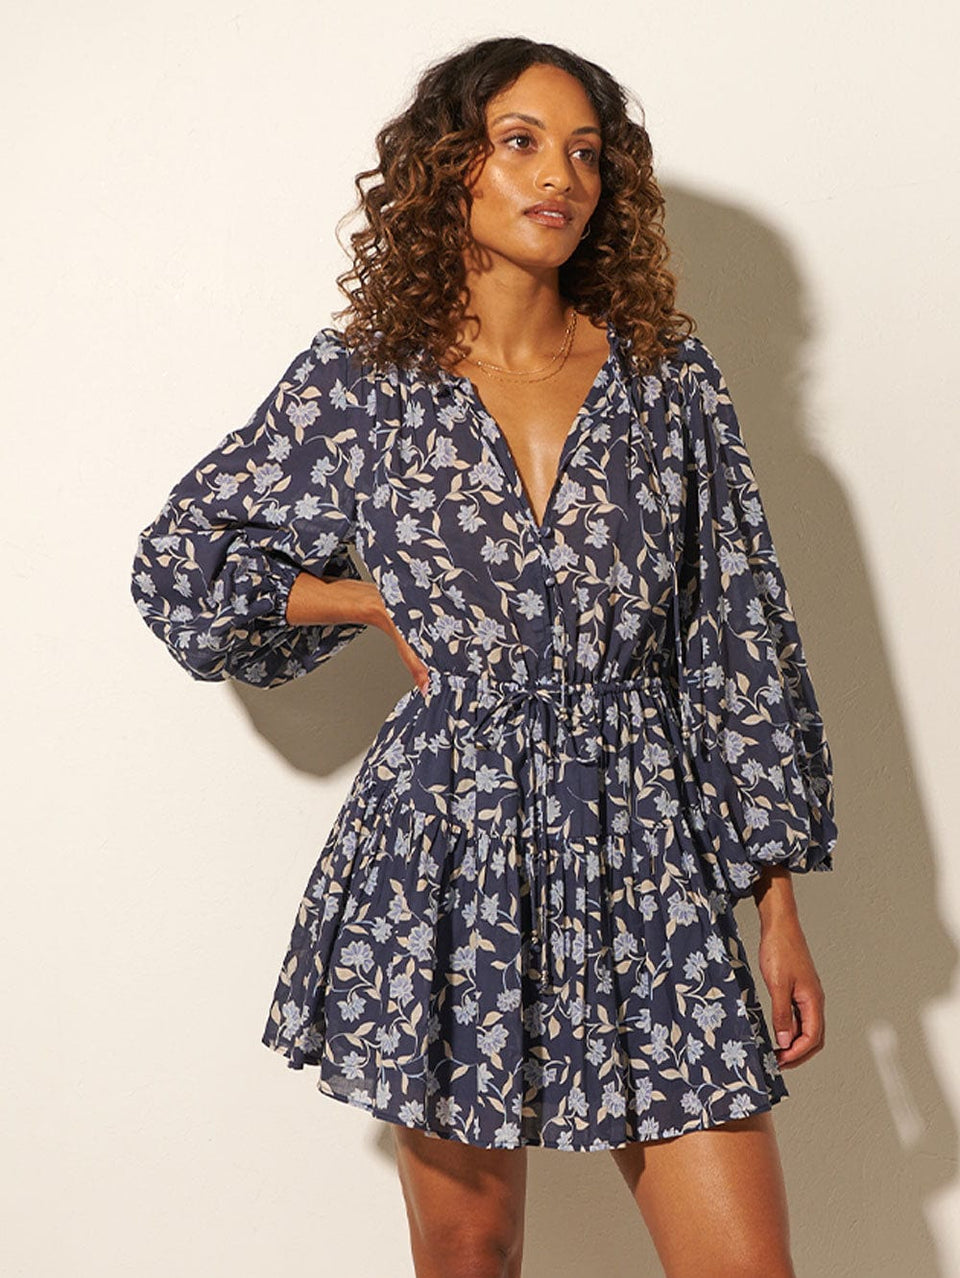 Studio model wears KIVARI Jeanne Mini Dress: A navy and sky blue floral dress made from cotton and featuring a button front, elasticated waist tie, full-length blouson sleeves and frill collar detail.